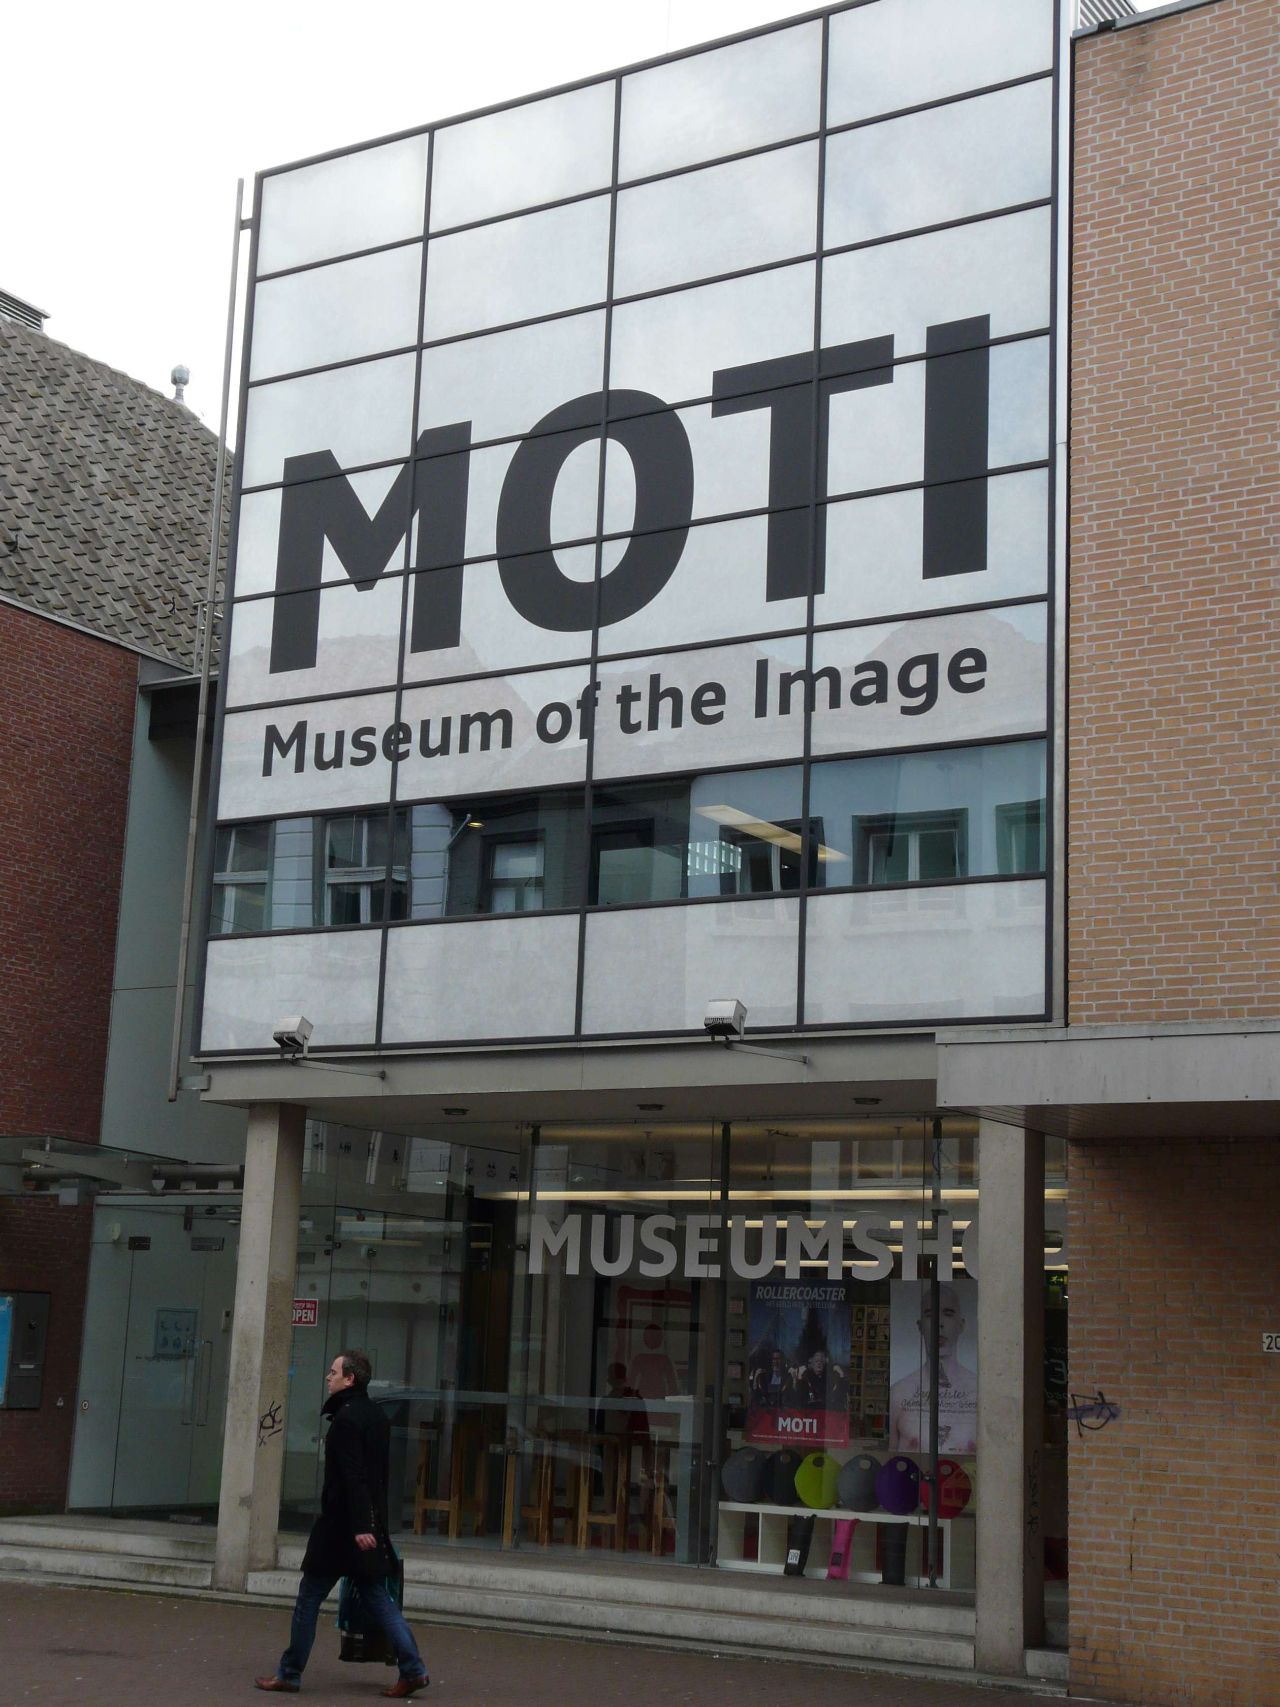 Museum of the Image - MOTI (Breda) - Visitor Information & Reviews